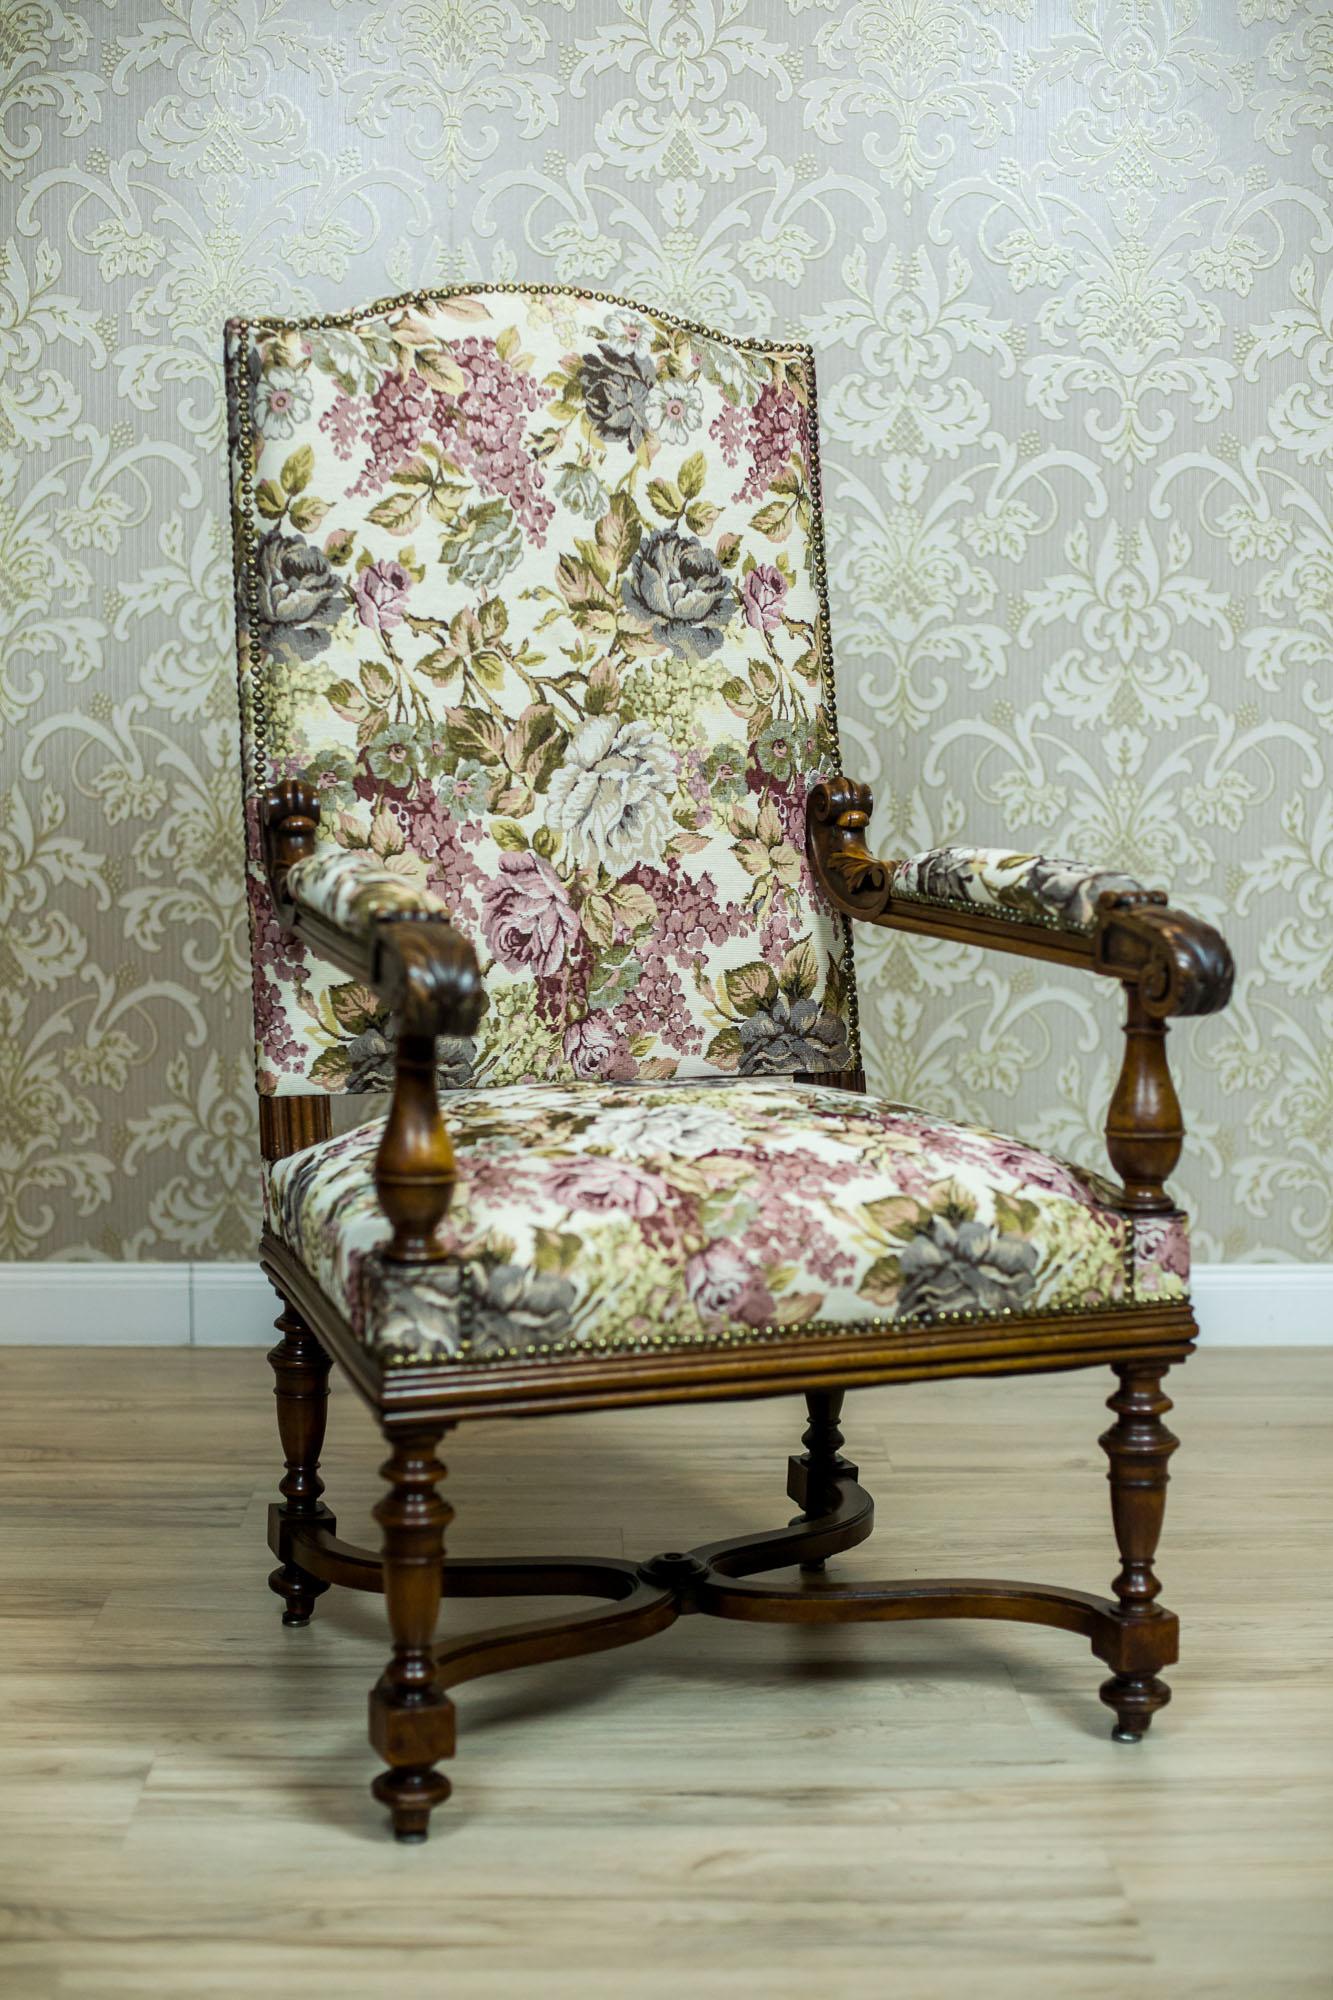 French Oak Armchair/Throne from the Turn of the 19th and 20th Centuries in Floral Upholstery

We present you this grand French armchair made of oak wood, with a softly upholstered seat and a high backrest.
The turned legs of the armchair are